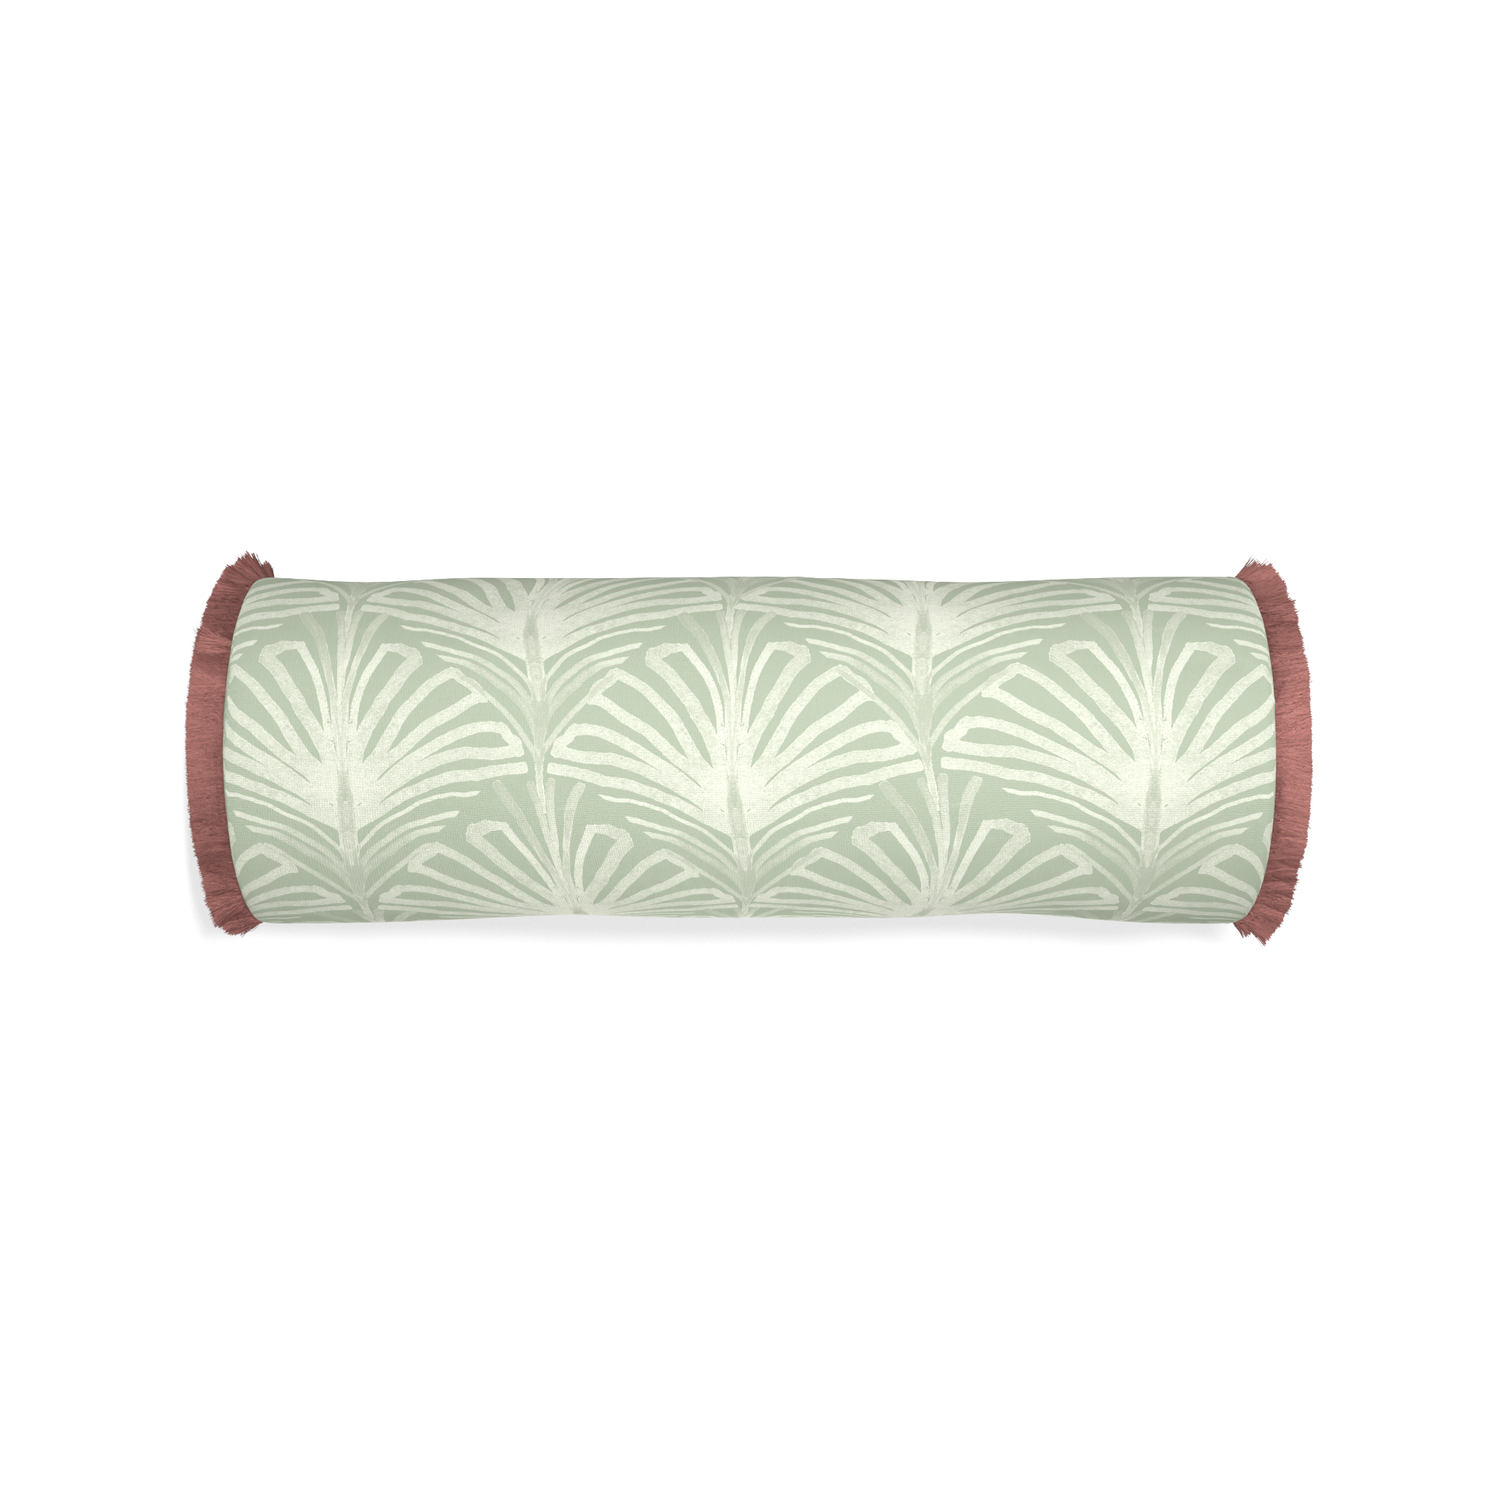 Bolster suzy sage custom pillow with d fringe on white background